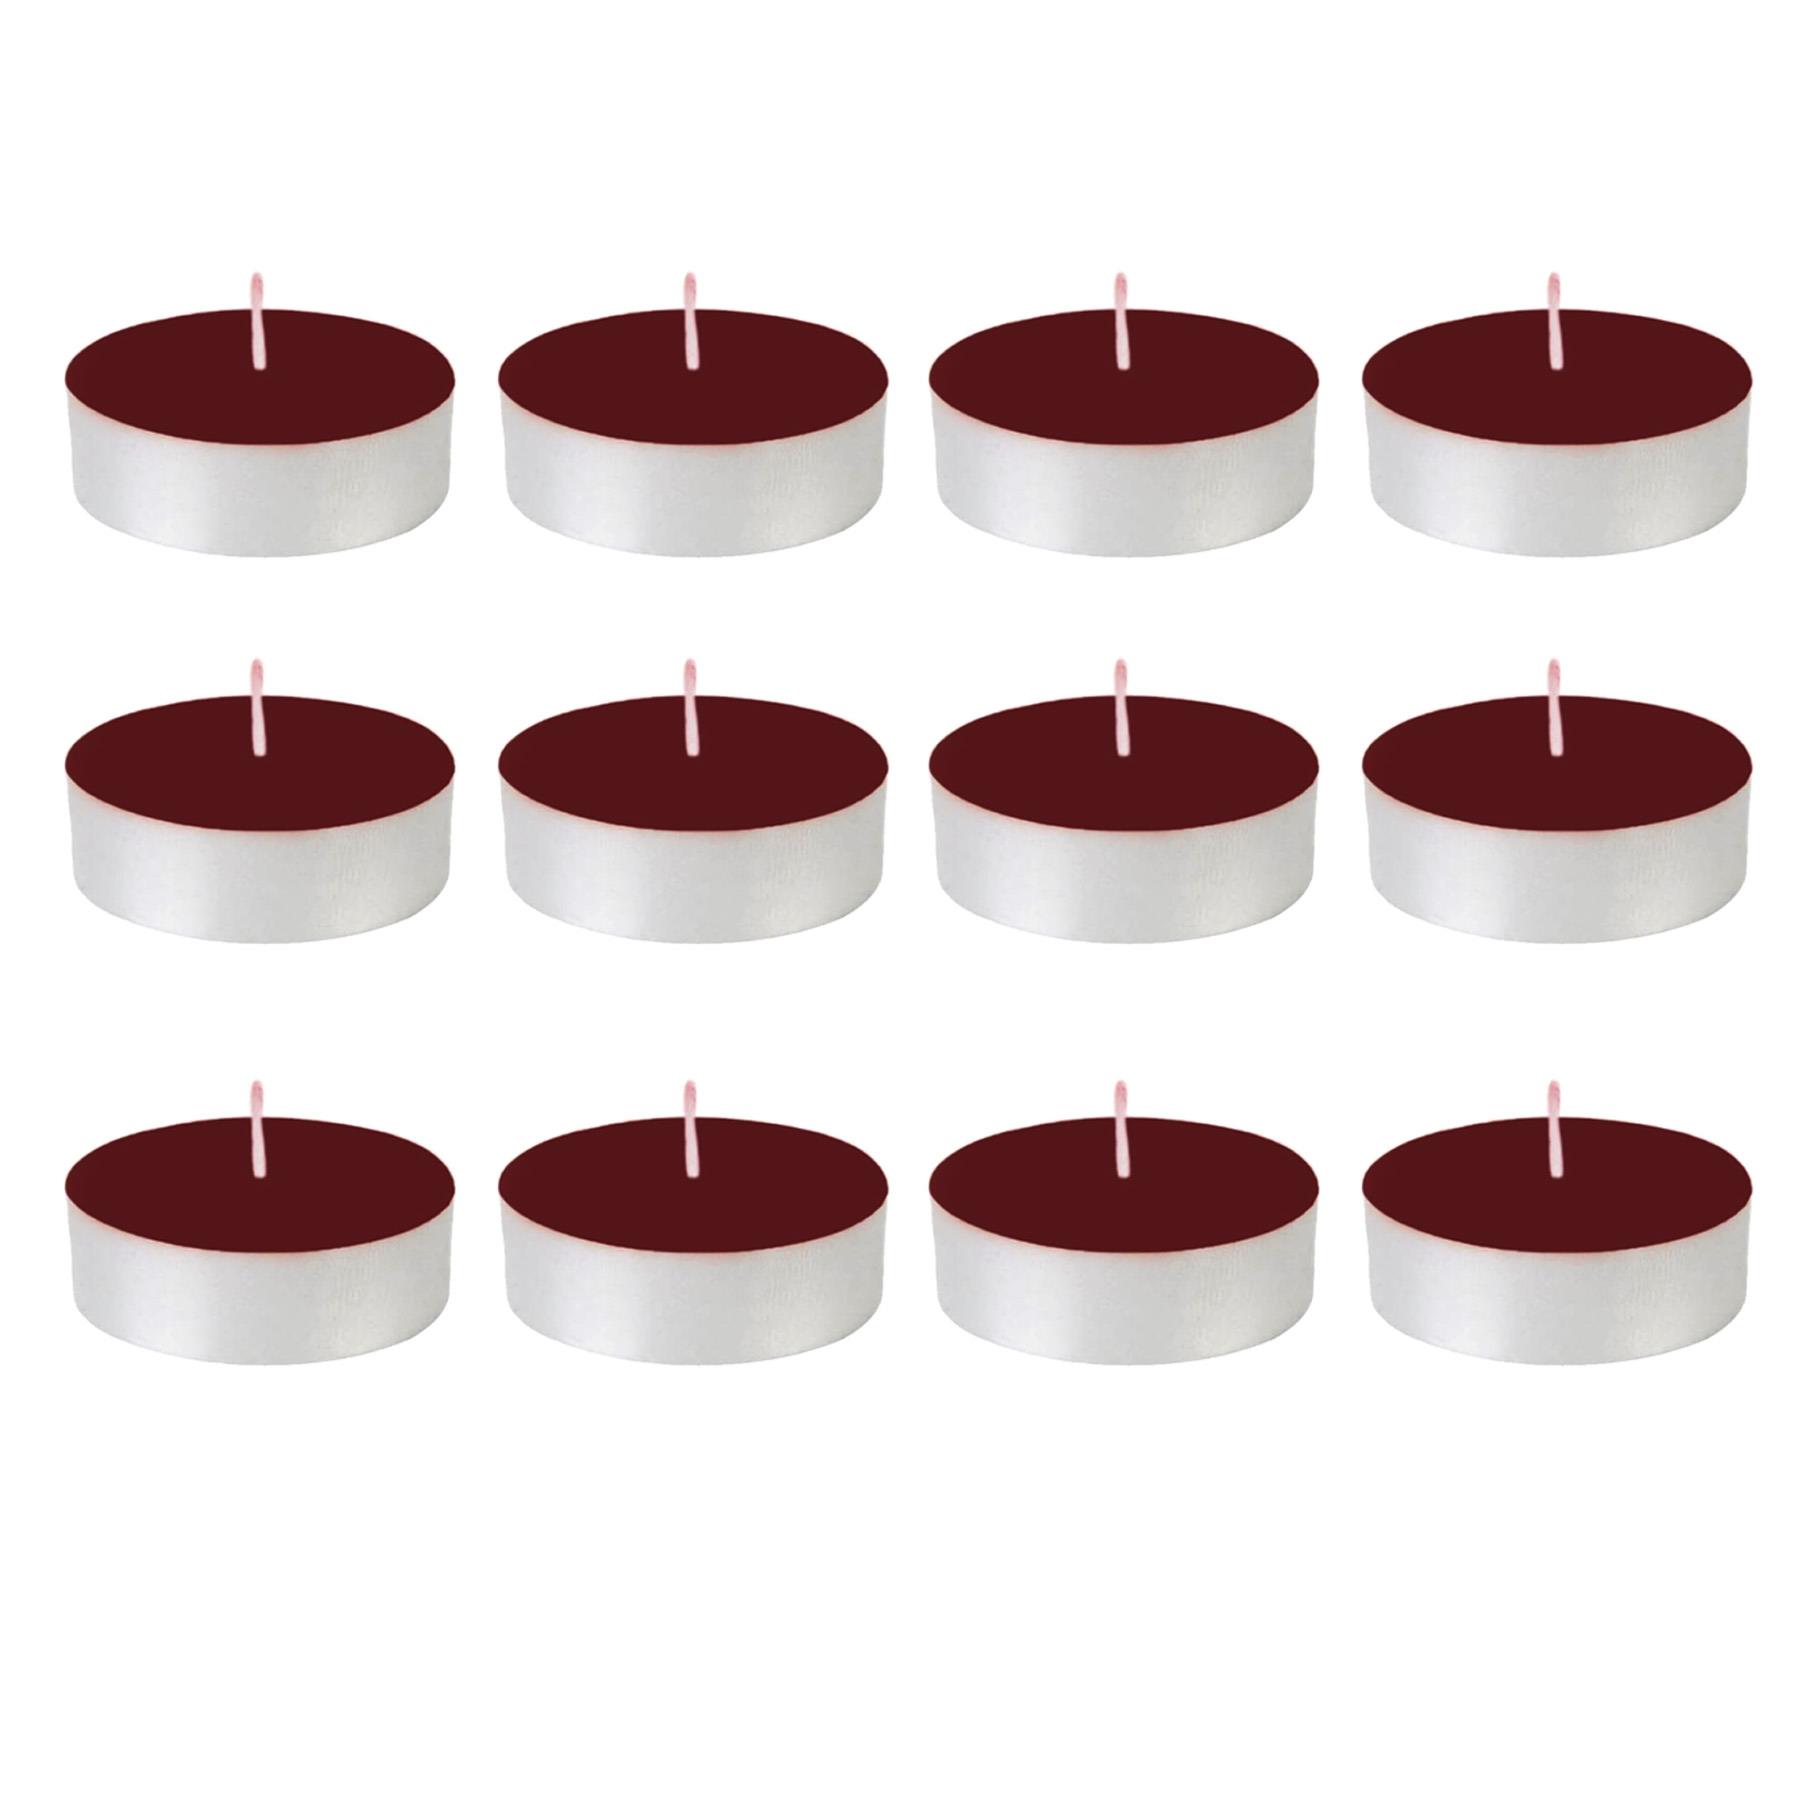 Christmas 12 Pack Scented Tea Light Candles Pan Aroma Cinnamon Spice